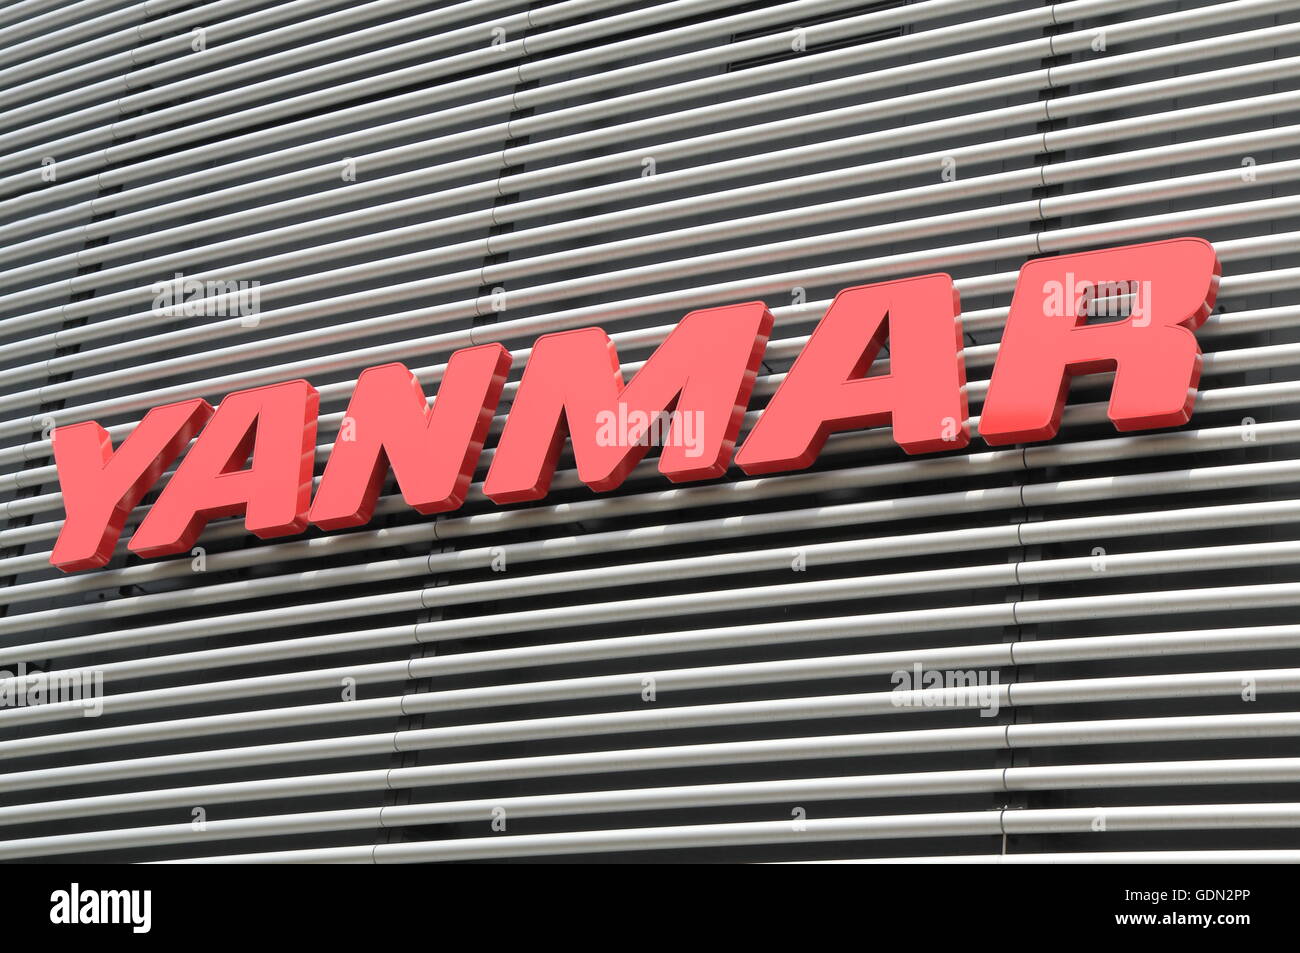 Yanmar company, Japanese diesel engine manufacturer founded in 1912. Stock Photo